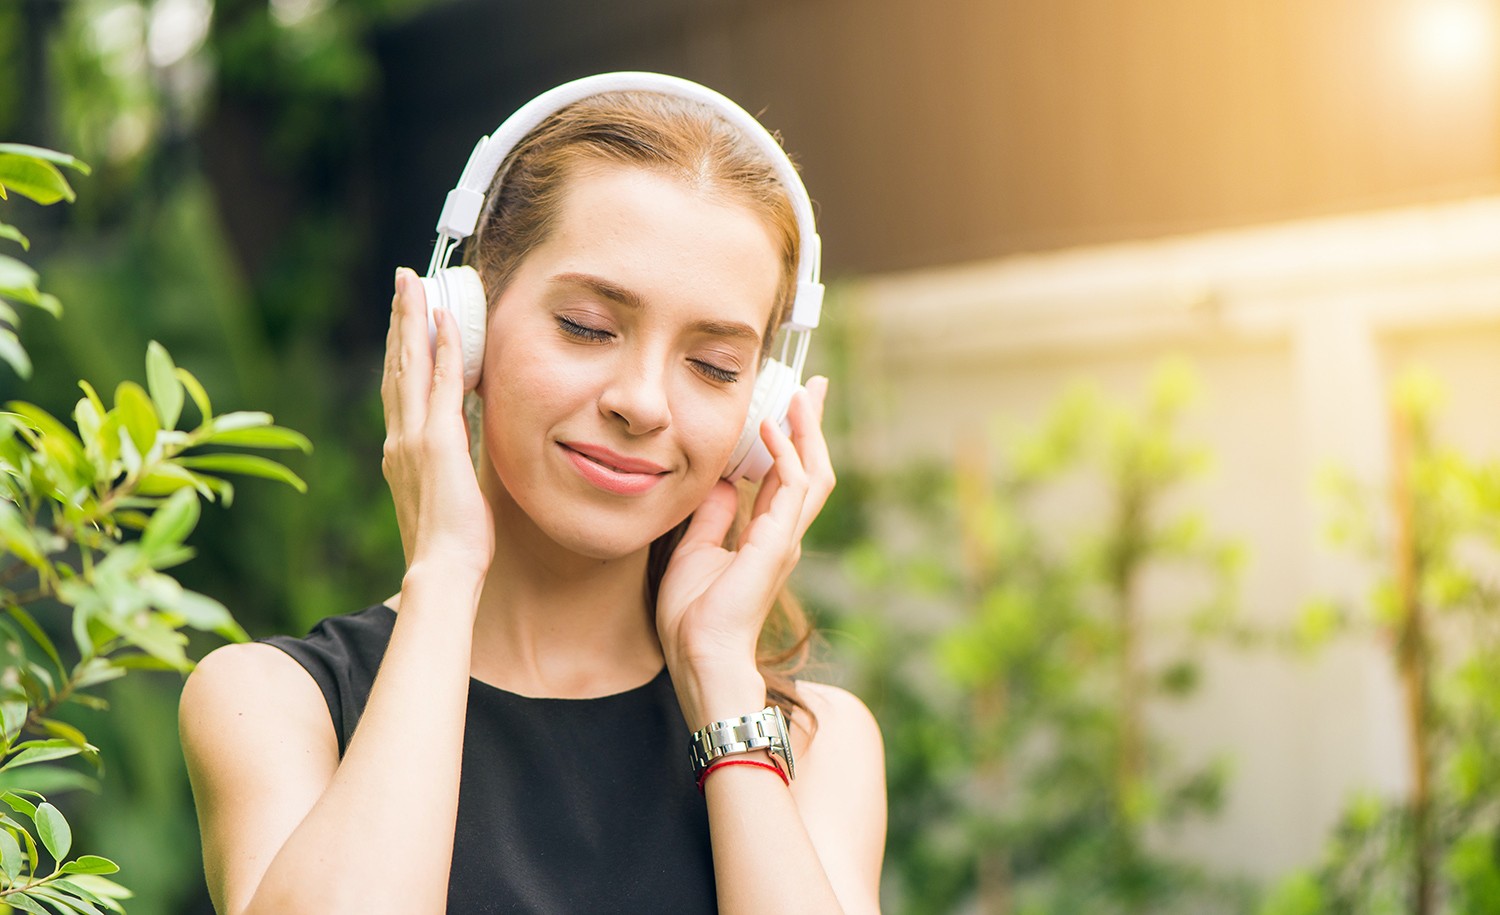 An introvert listens to music on her headphones